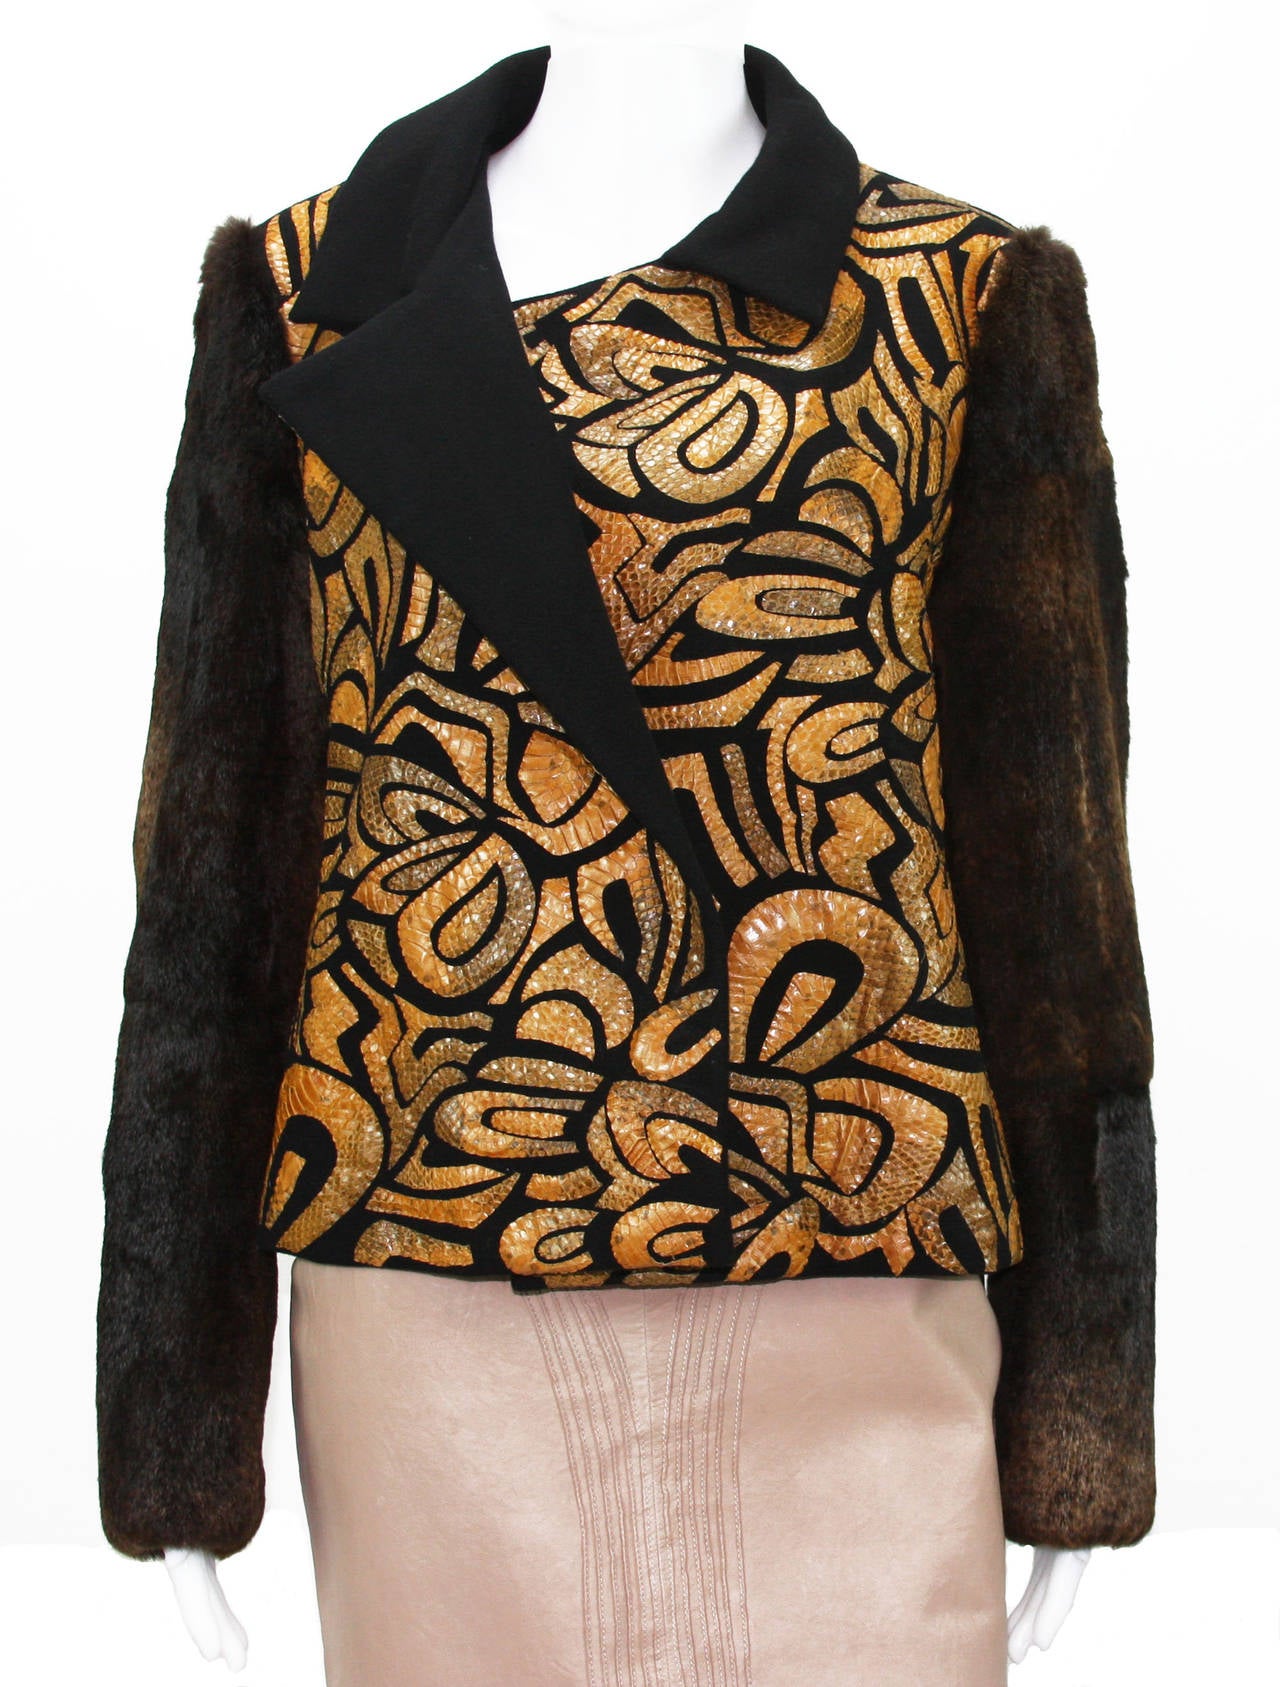 NEW DRIES VAN NOTEN RUNWAY JACKET

COMPOSITION – WOOL, SNAKESKIN, RABBIT
COLORS – BLACK, YELLOW, BROWN
DOUBLE BREASTED OPEN FRONT
80% WOOL, 20% POLYESTER
REAL SNAKESKIN APPLIQUE
100% RABBIT FUR SLEEVE
FULLY LINED
Size 40
MEASUREMENTS FLAT: